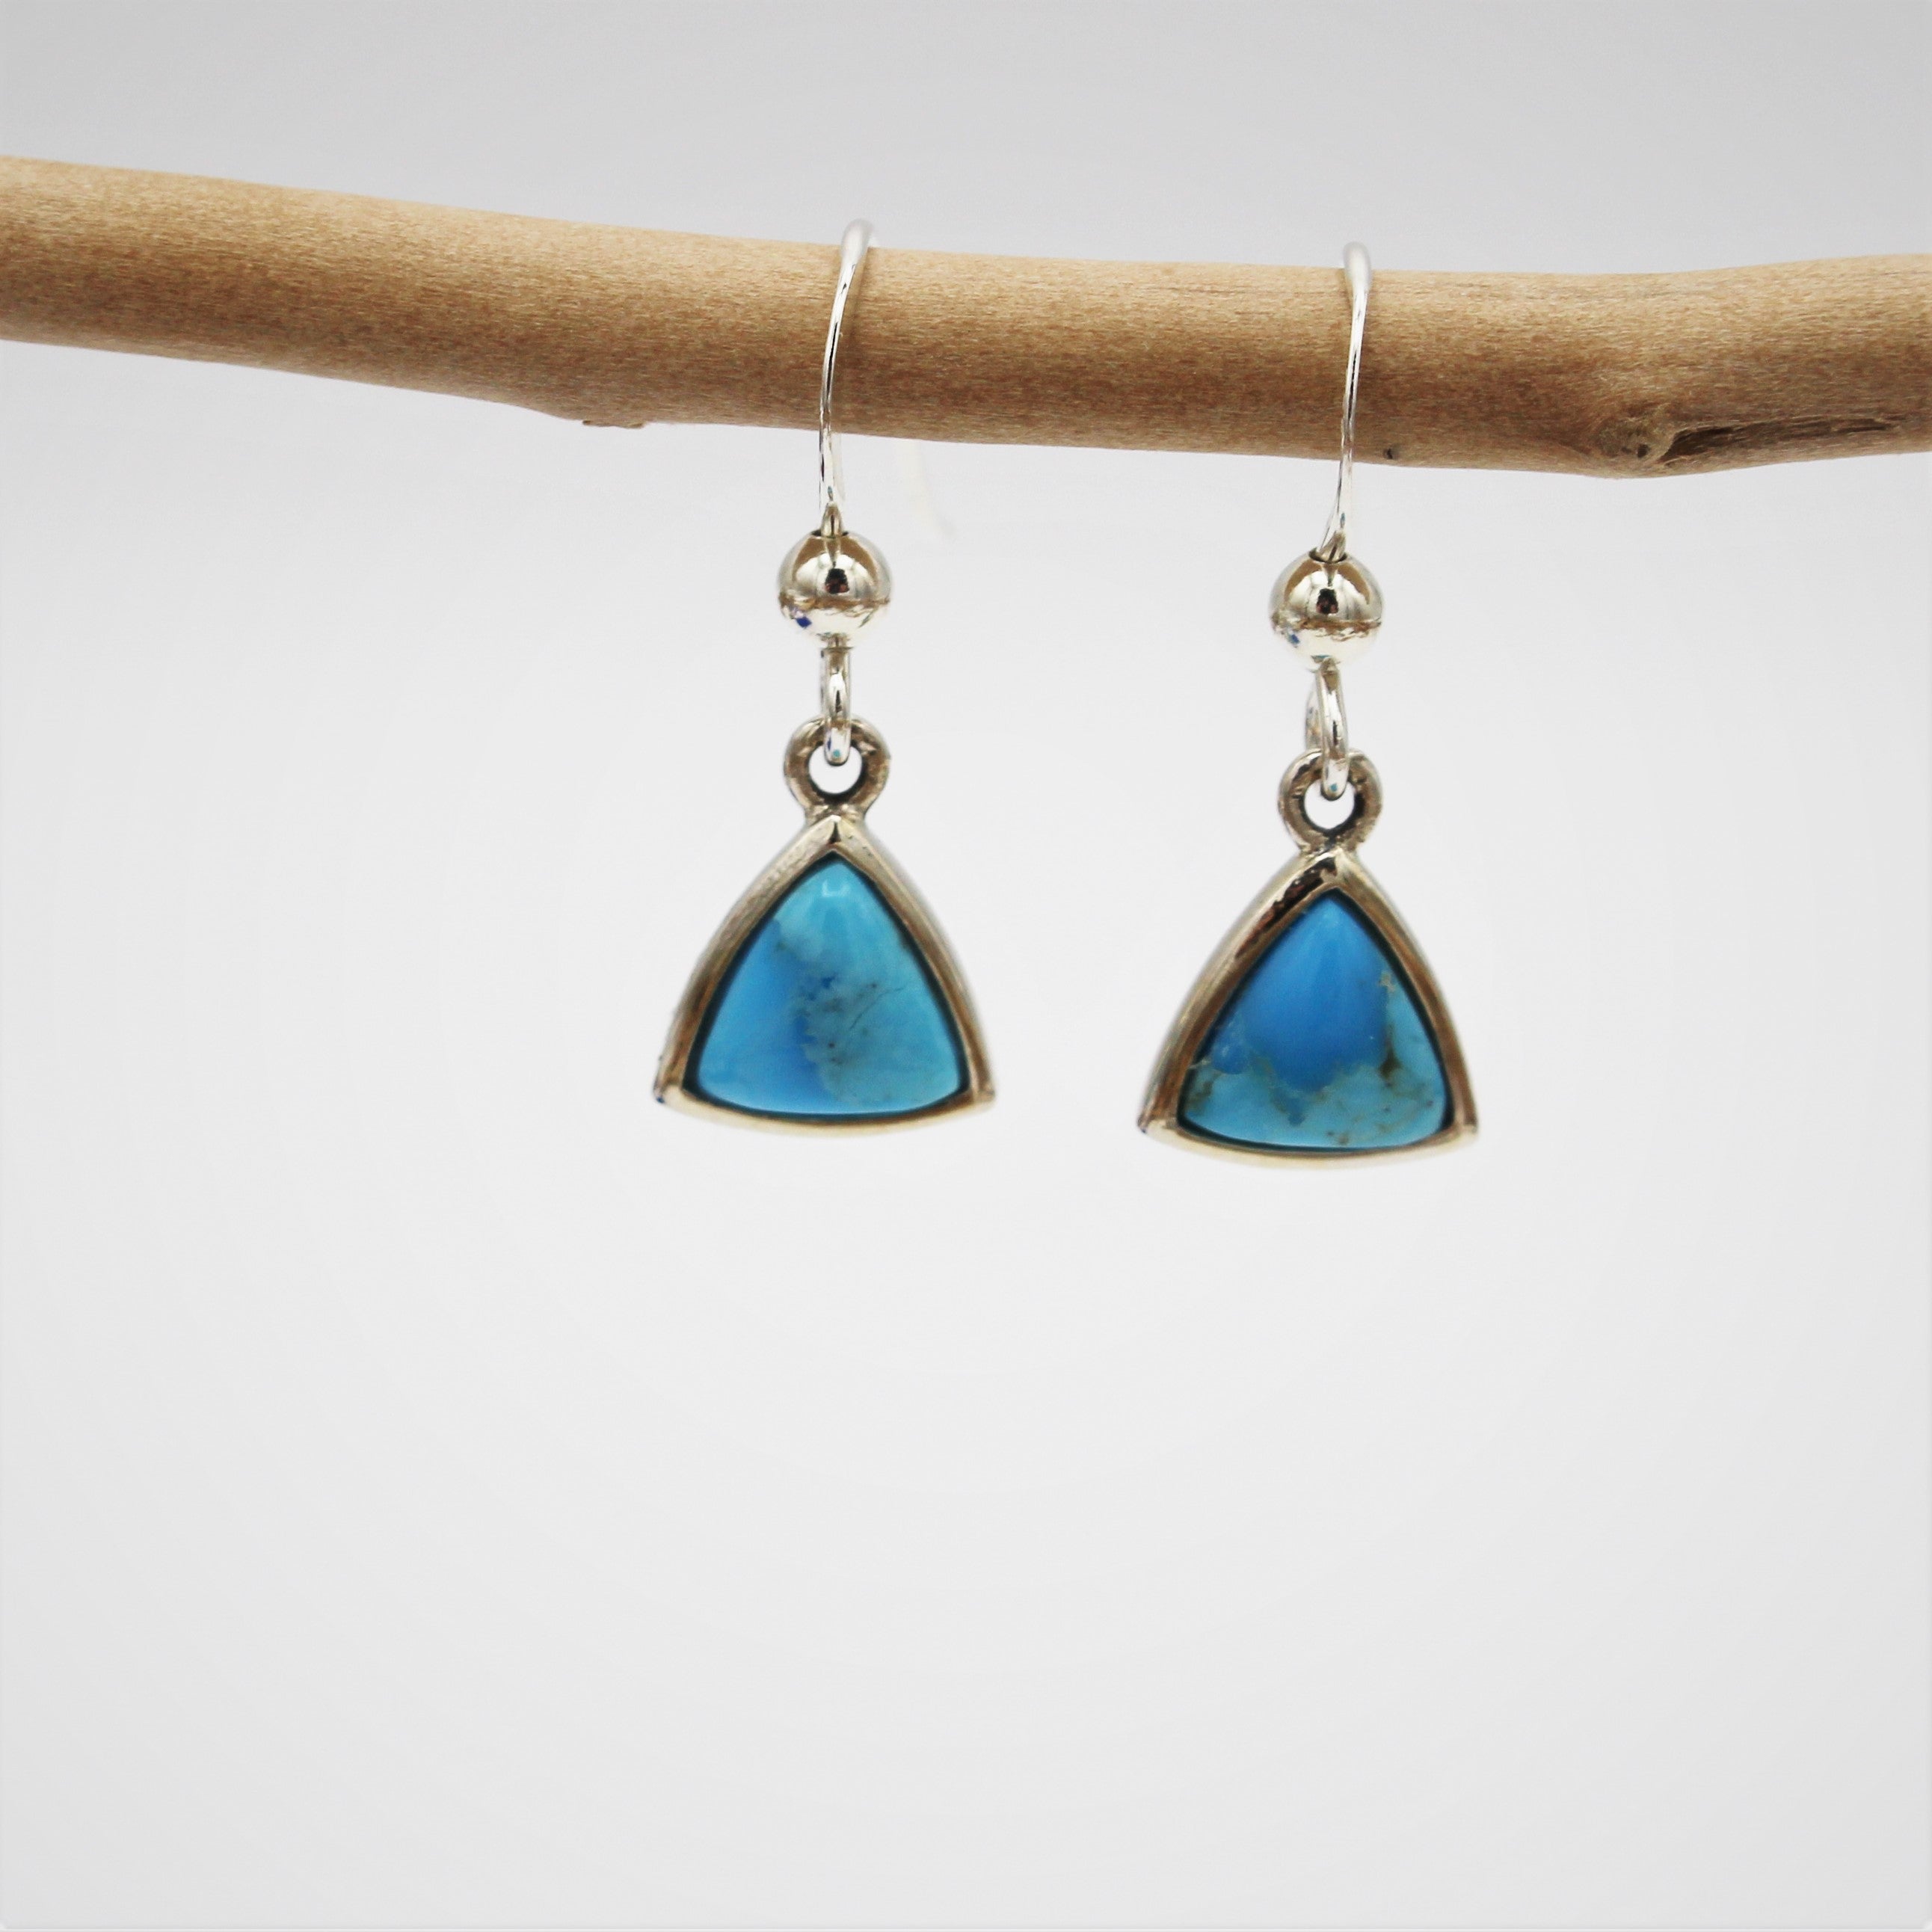 Silver and Turquoise Triangle Hook Earrings